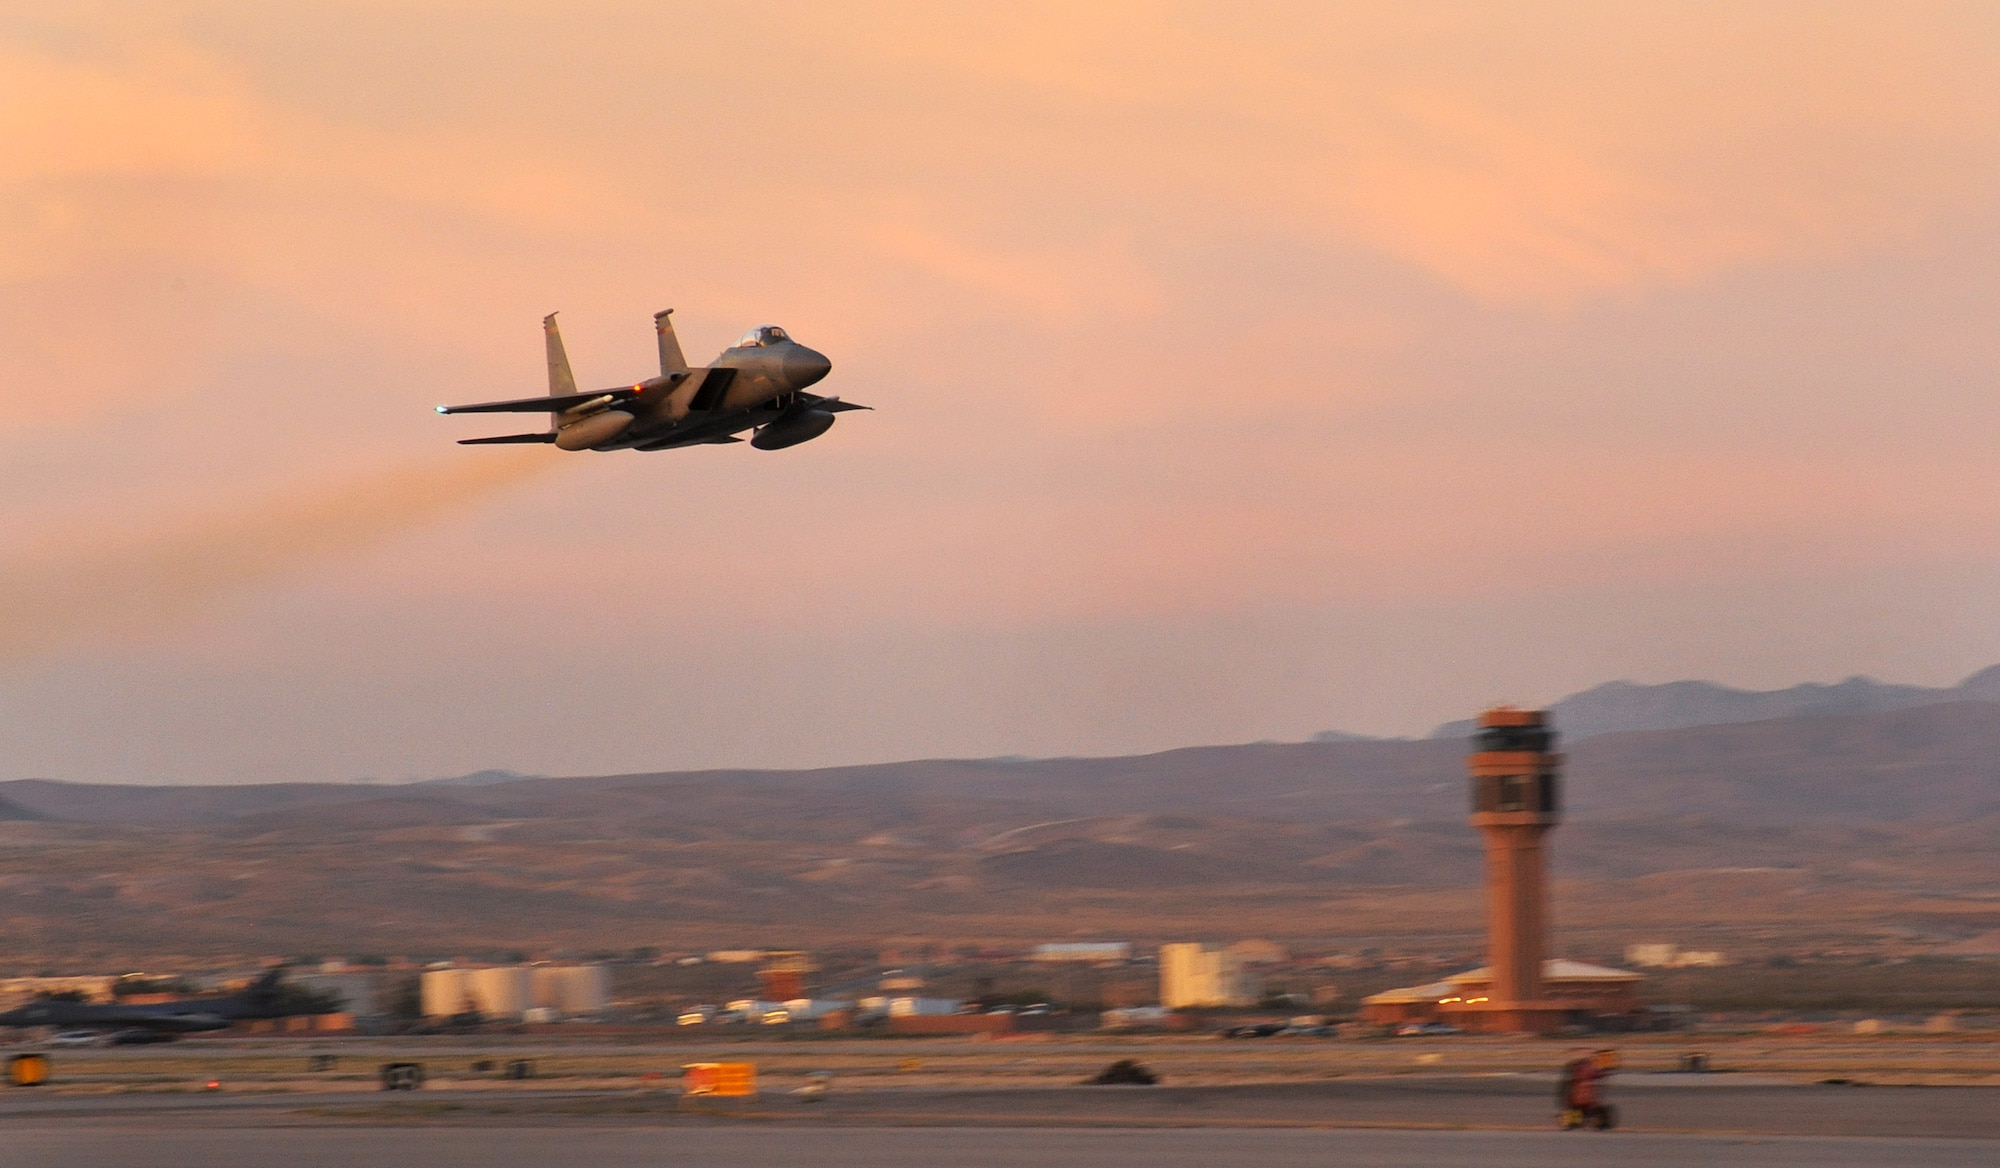 An Oregon Air National Guard F-15 Eagle, assigned to the 142nd Fighter Wing, takes off from Nellis Air Force, Nev., on a late day sortie, June 8, 2017. Over 120 Oregon Air Guardsmen are supporting the Weapons Instructor Course during their three-week duty assignment. (U.S. Air National Guard photo by Master Sgt. John Hughel, 142nd Fighter Wing Public Affairs)